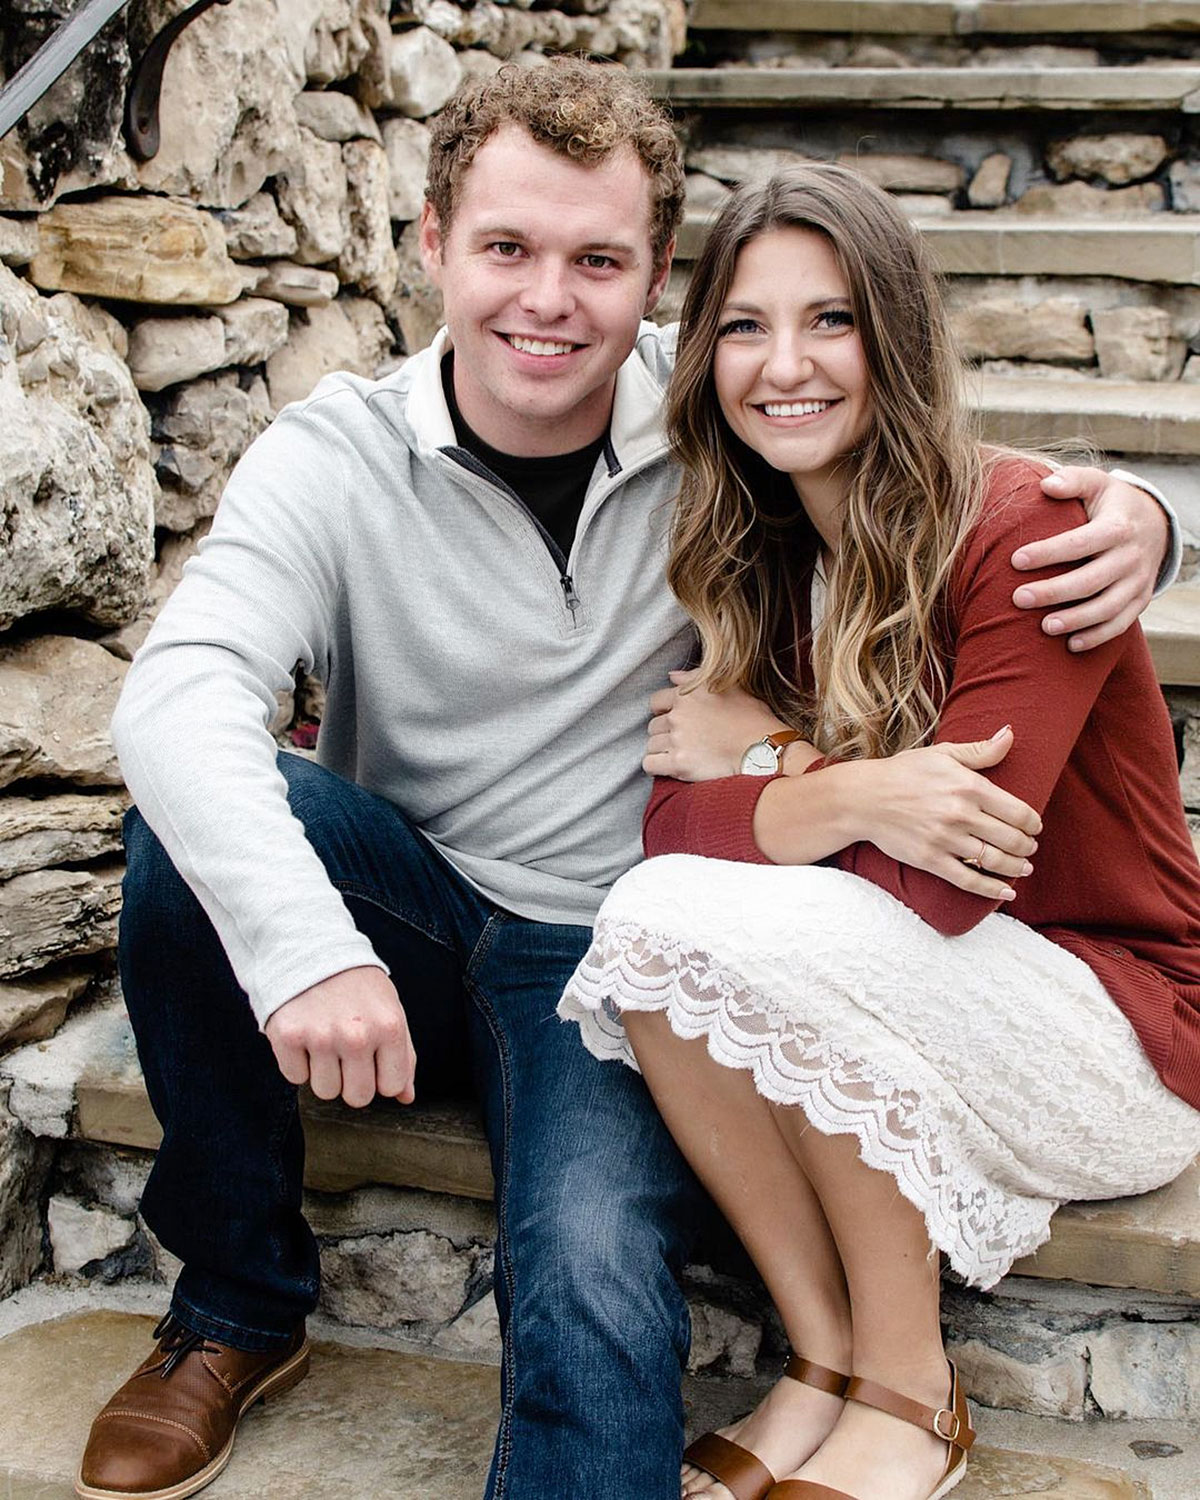 Alyssa Hart Brother Porn - Relive the Duggar Family's Courtship Beginnings: Pics